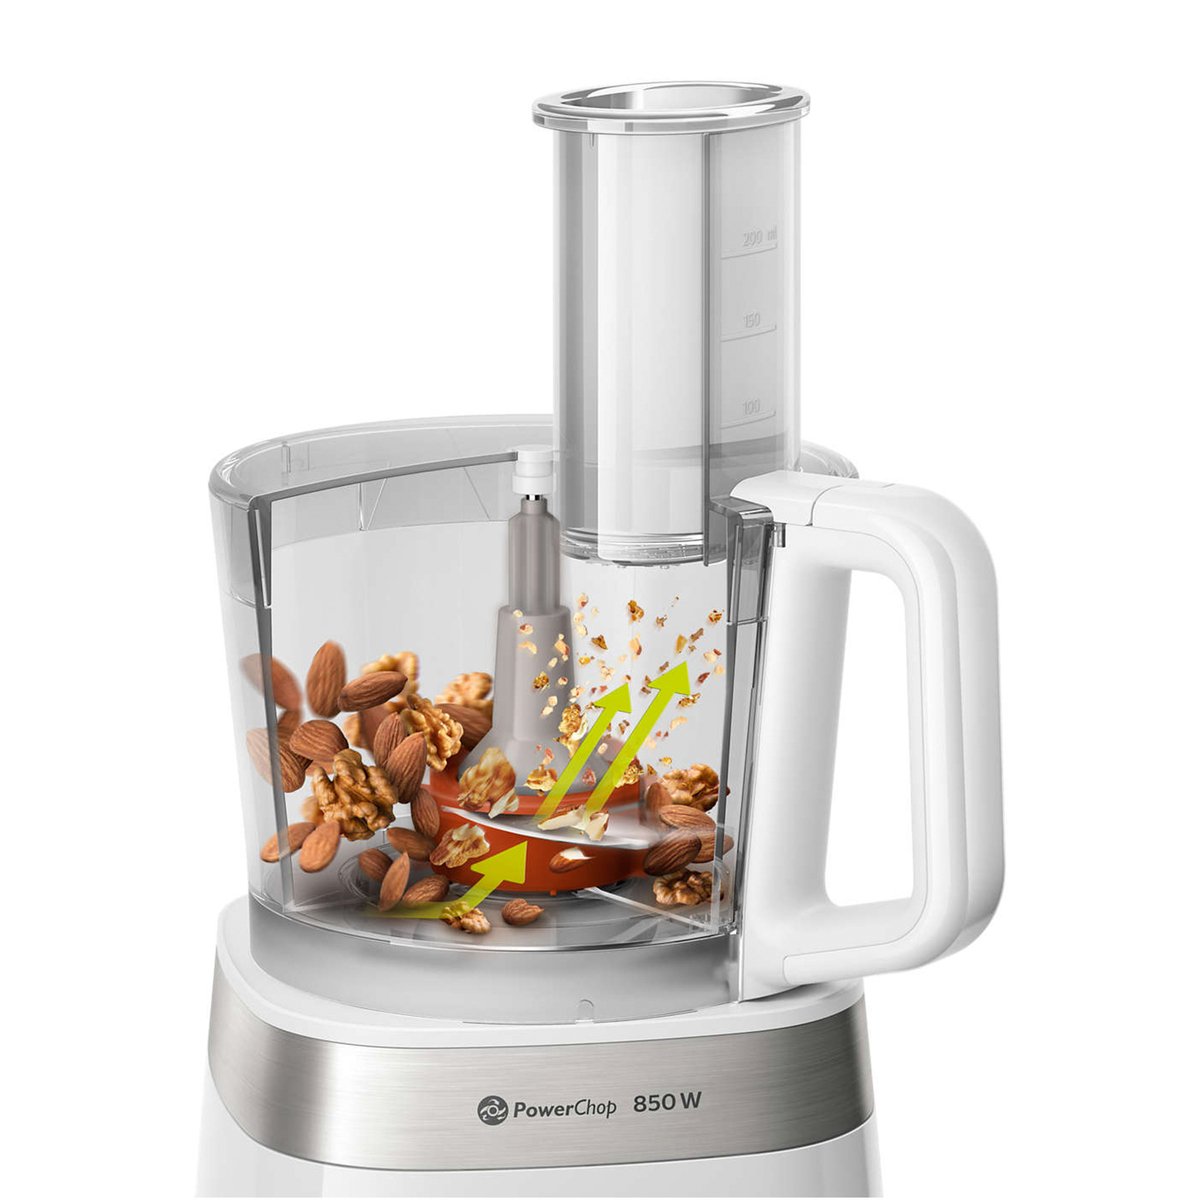 Philips Compact Food Processor HR7530/01